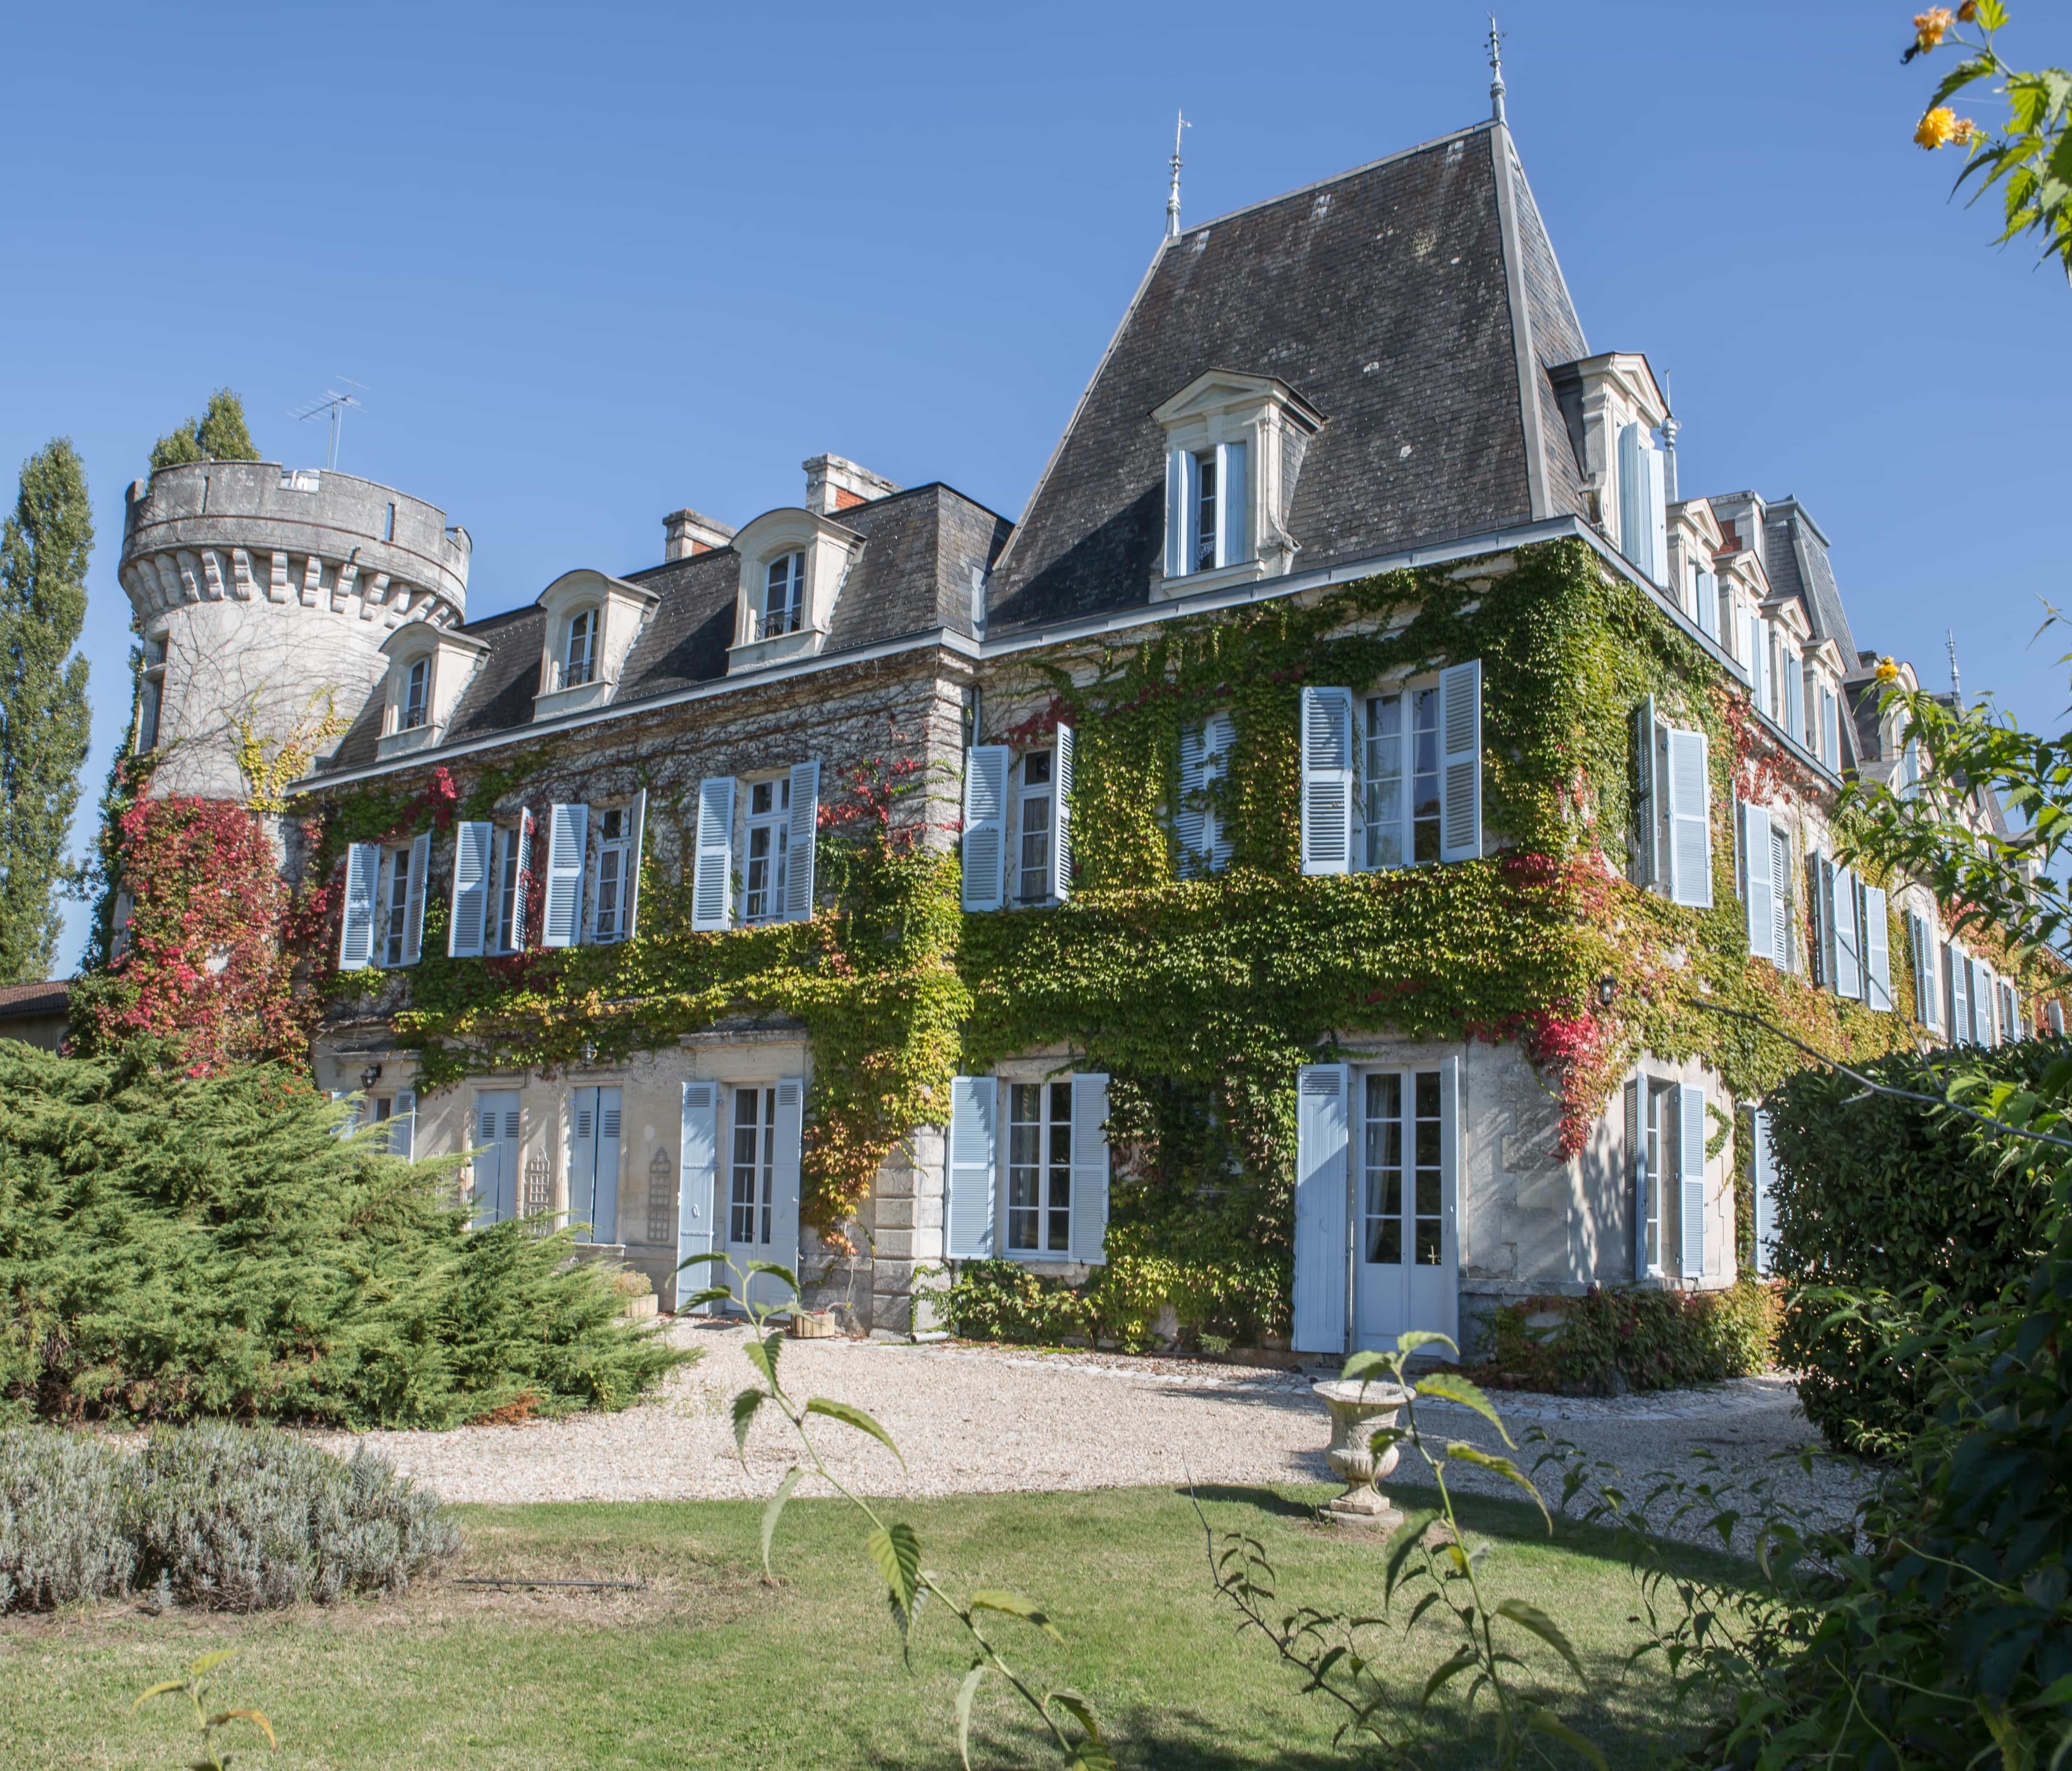 Château de Lalande, Annesse-et-Beaulie. Dordogne: There is a lovely lived-in feel to this pale stone château in parkland a short drive from Périgeux. It was rescued from ruin by its owners, and is filled with antiques, old-world charm and modern comf